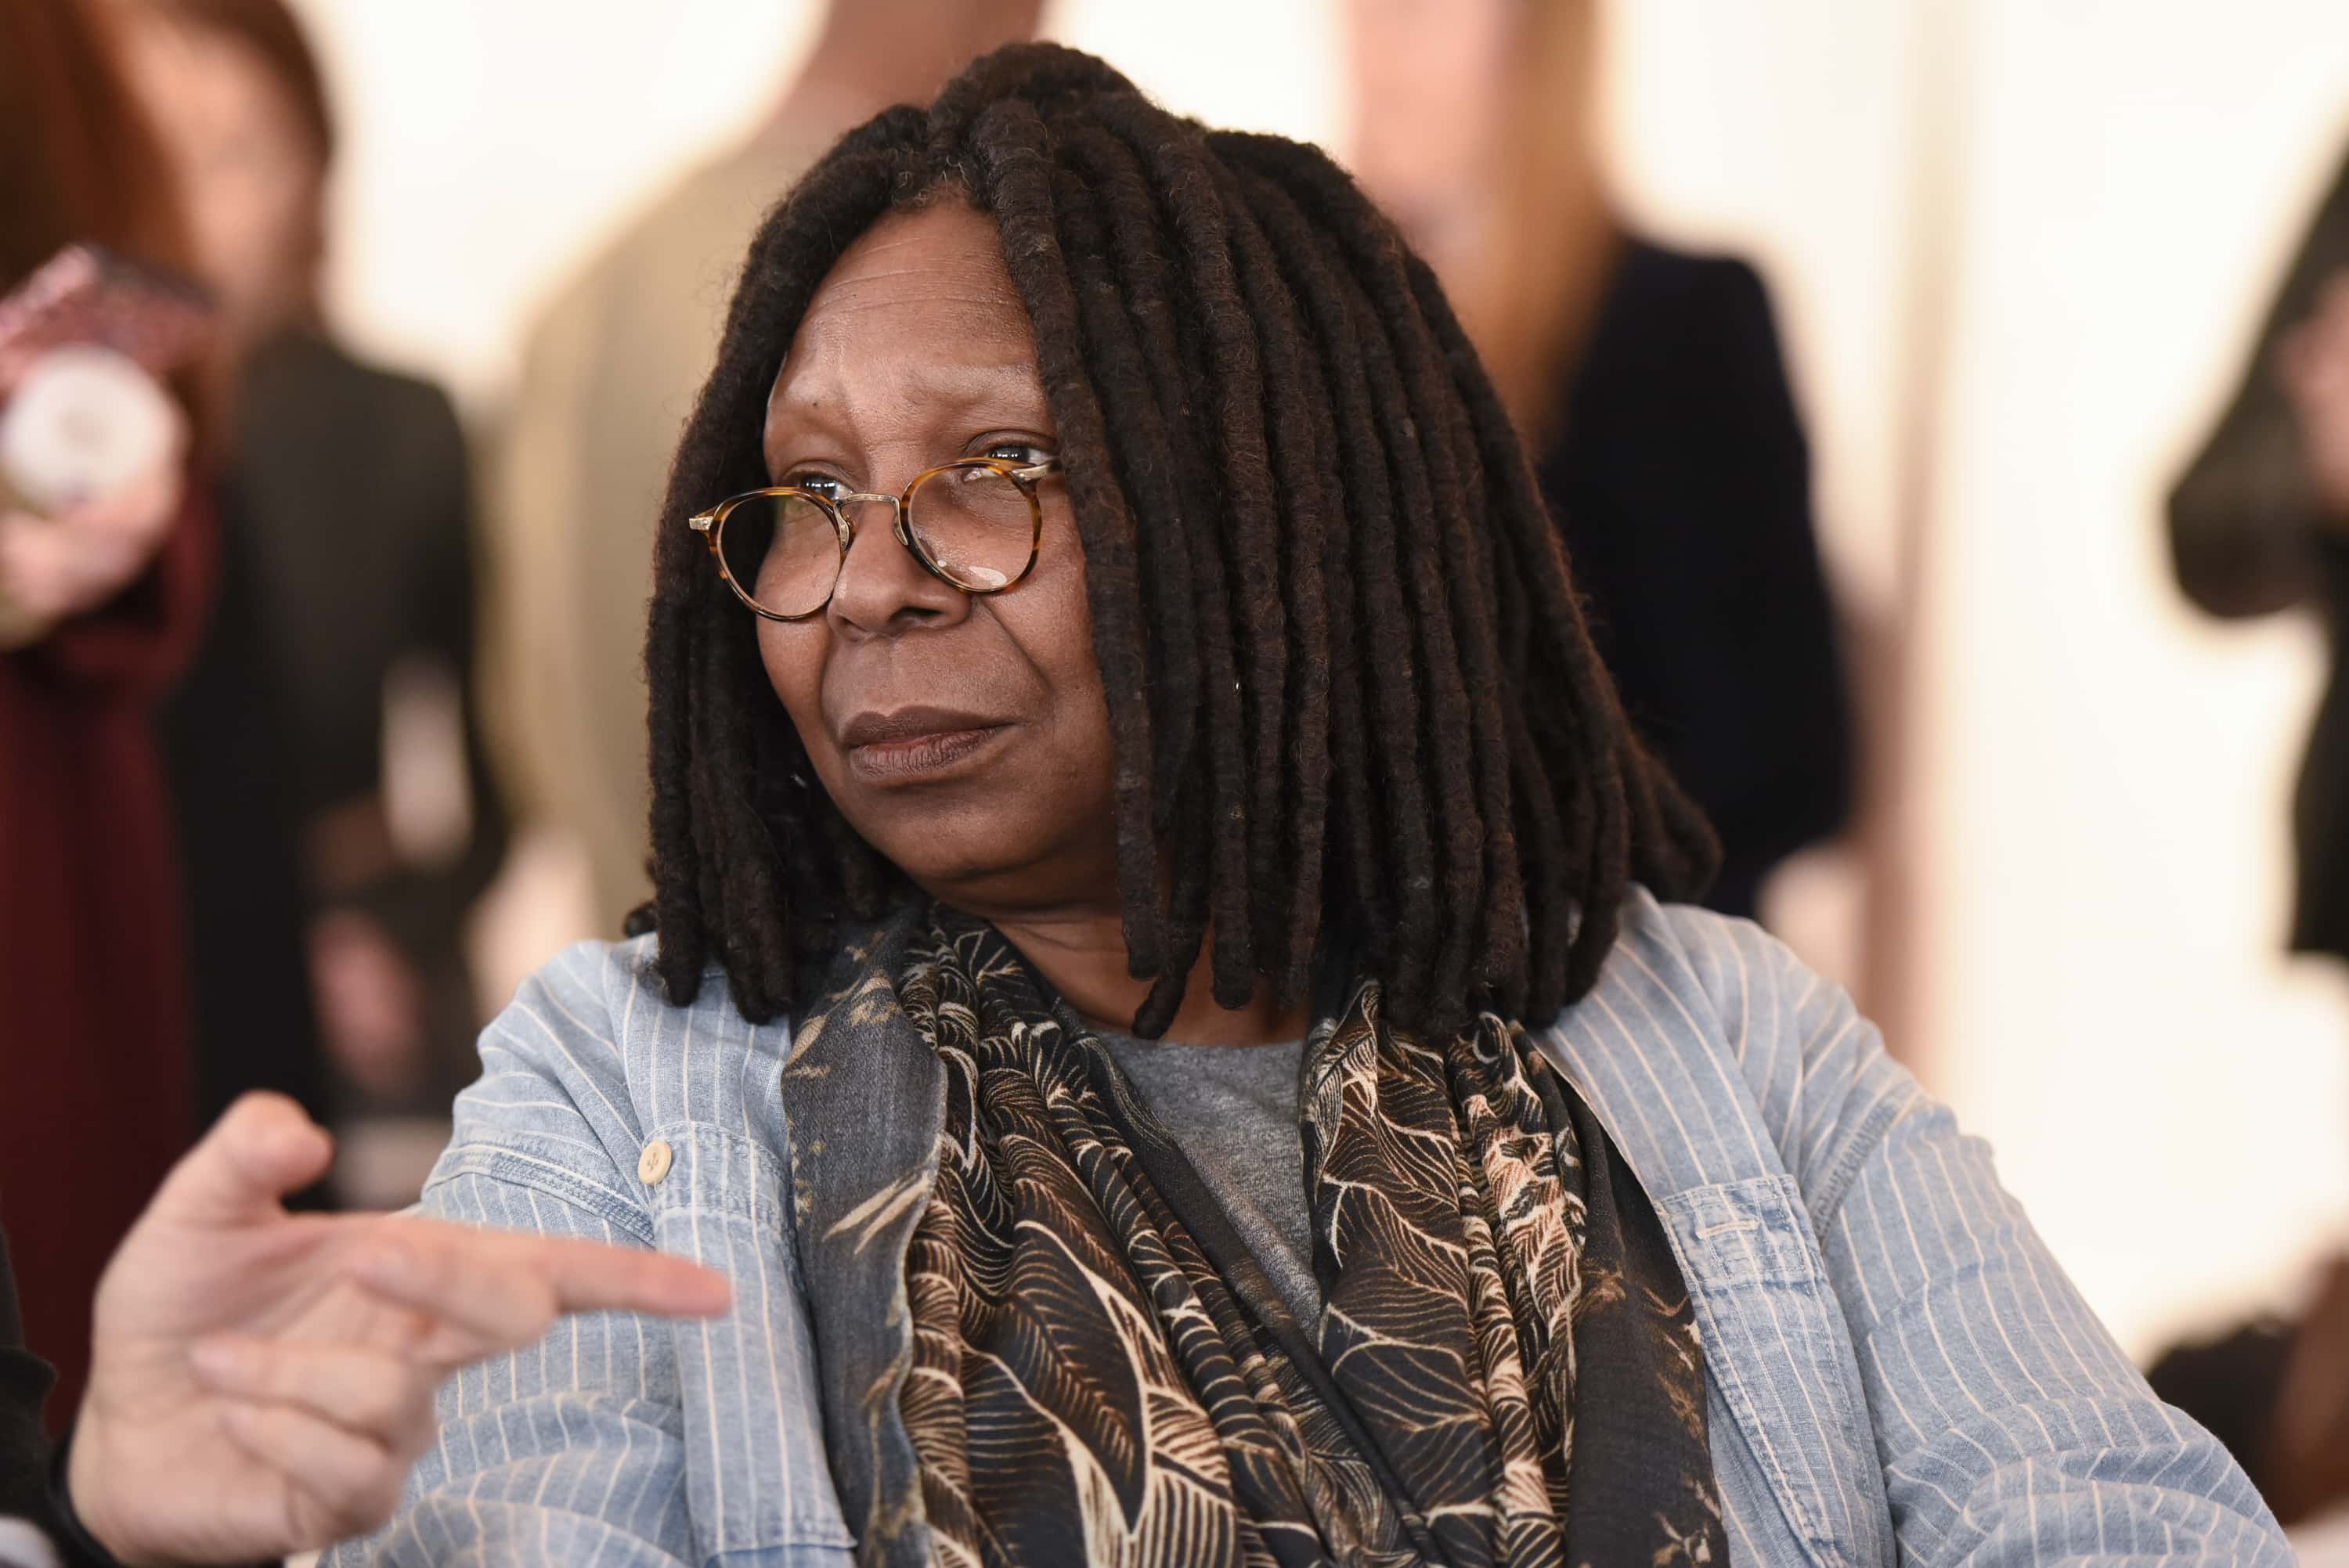 <p>Whoopi Goldberg is a <em>Star Trek </em>super-fan, and when she heard that Gene Roddenberry was casting for the <em>Star Trek: The Next Generation</em>, she asked be a part of it. The original series was an inspiration to her. As she said, "When I was a little girl, it was like, 'Oh, we are in the future.' Uhura did that for me. So I want to be on your show". Her plea was successful, and she became Guinan the bartender.</p>